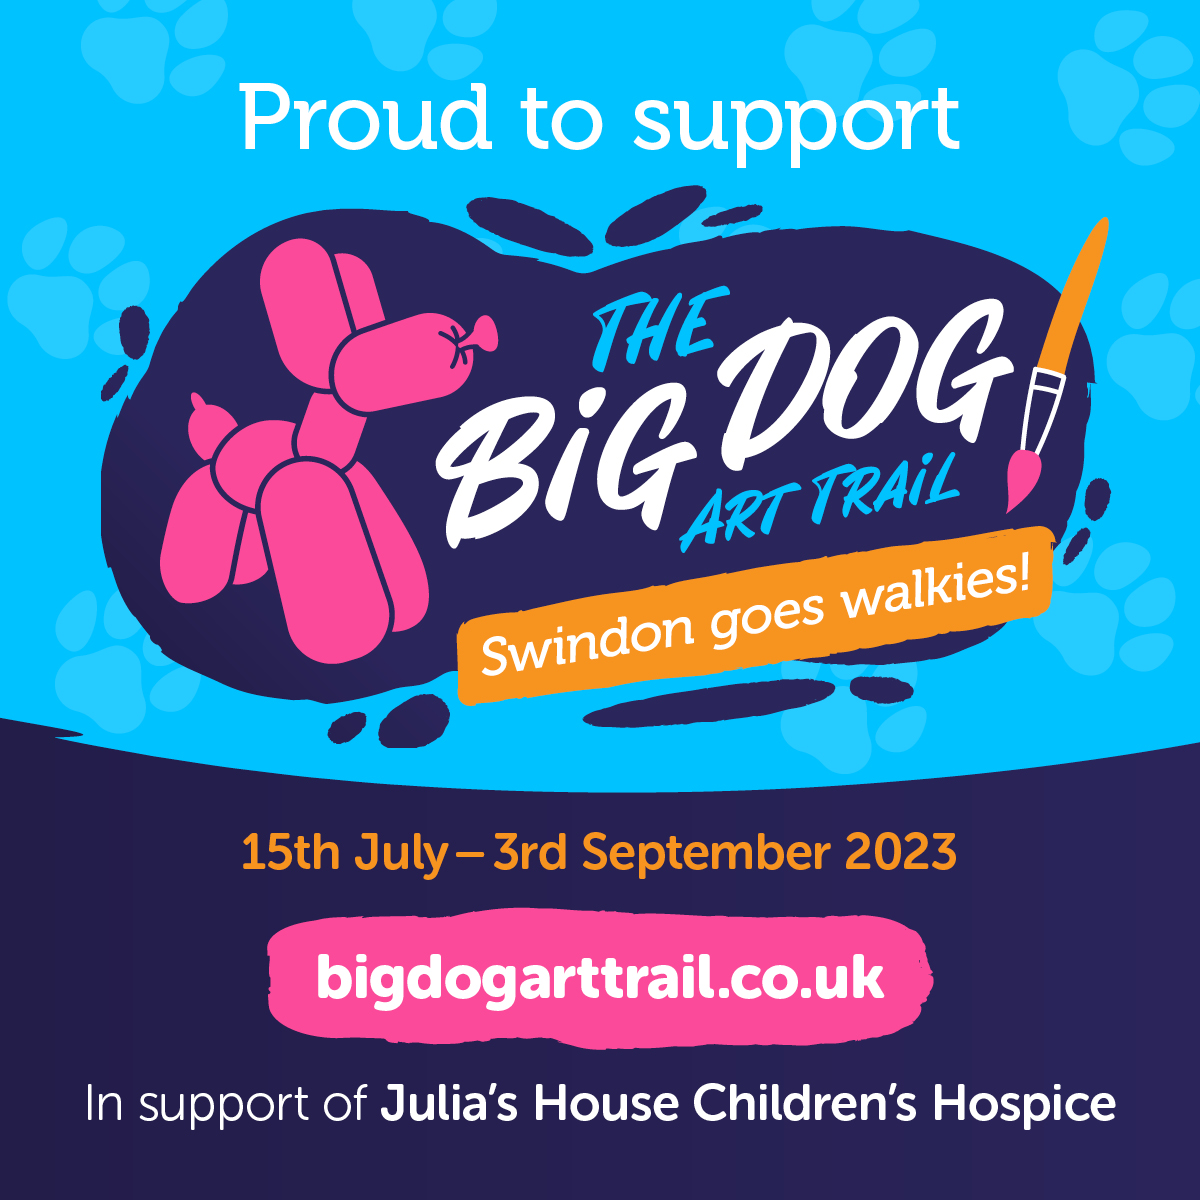 We are thrilled to announce that we are the headline sponsor for this year’s @BigDogArtTrail! Running from 15 Jul to 3 Sept 23, these super-sized balloon sculptures will create a free family-friendly walking trail throughout Swindon! Follow us to keep updated!